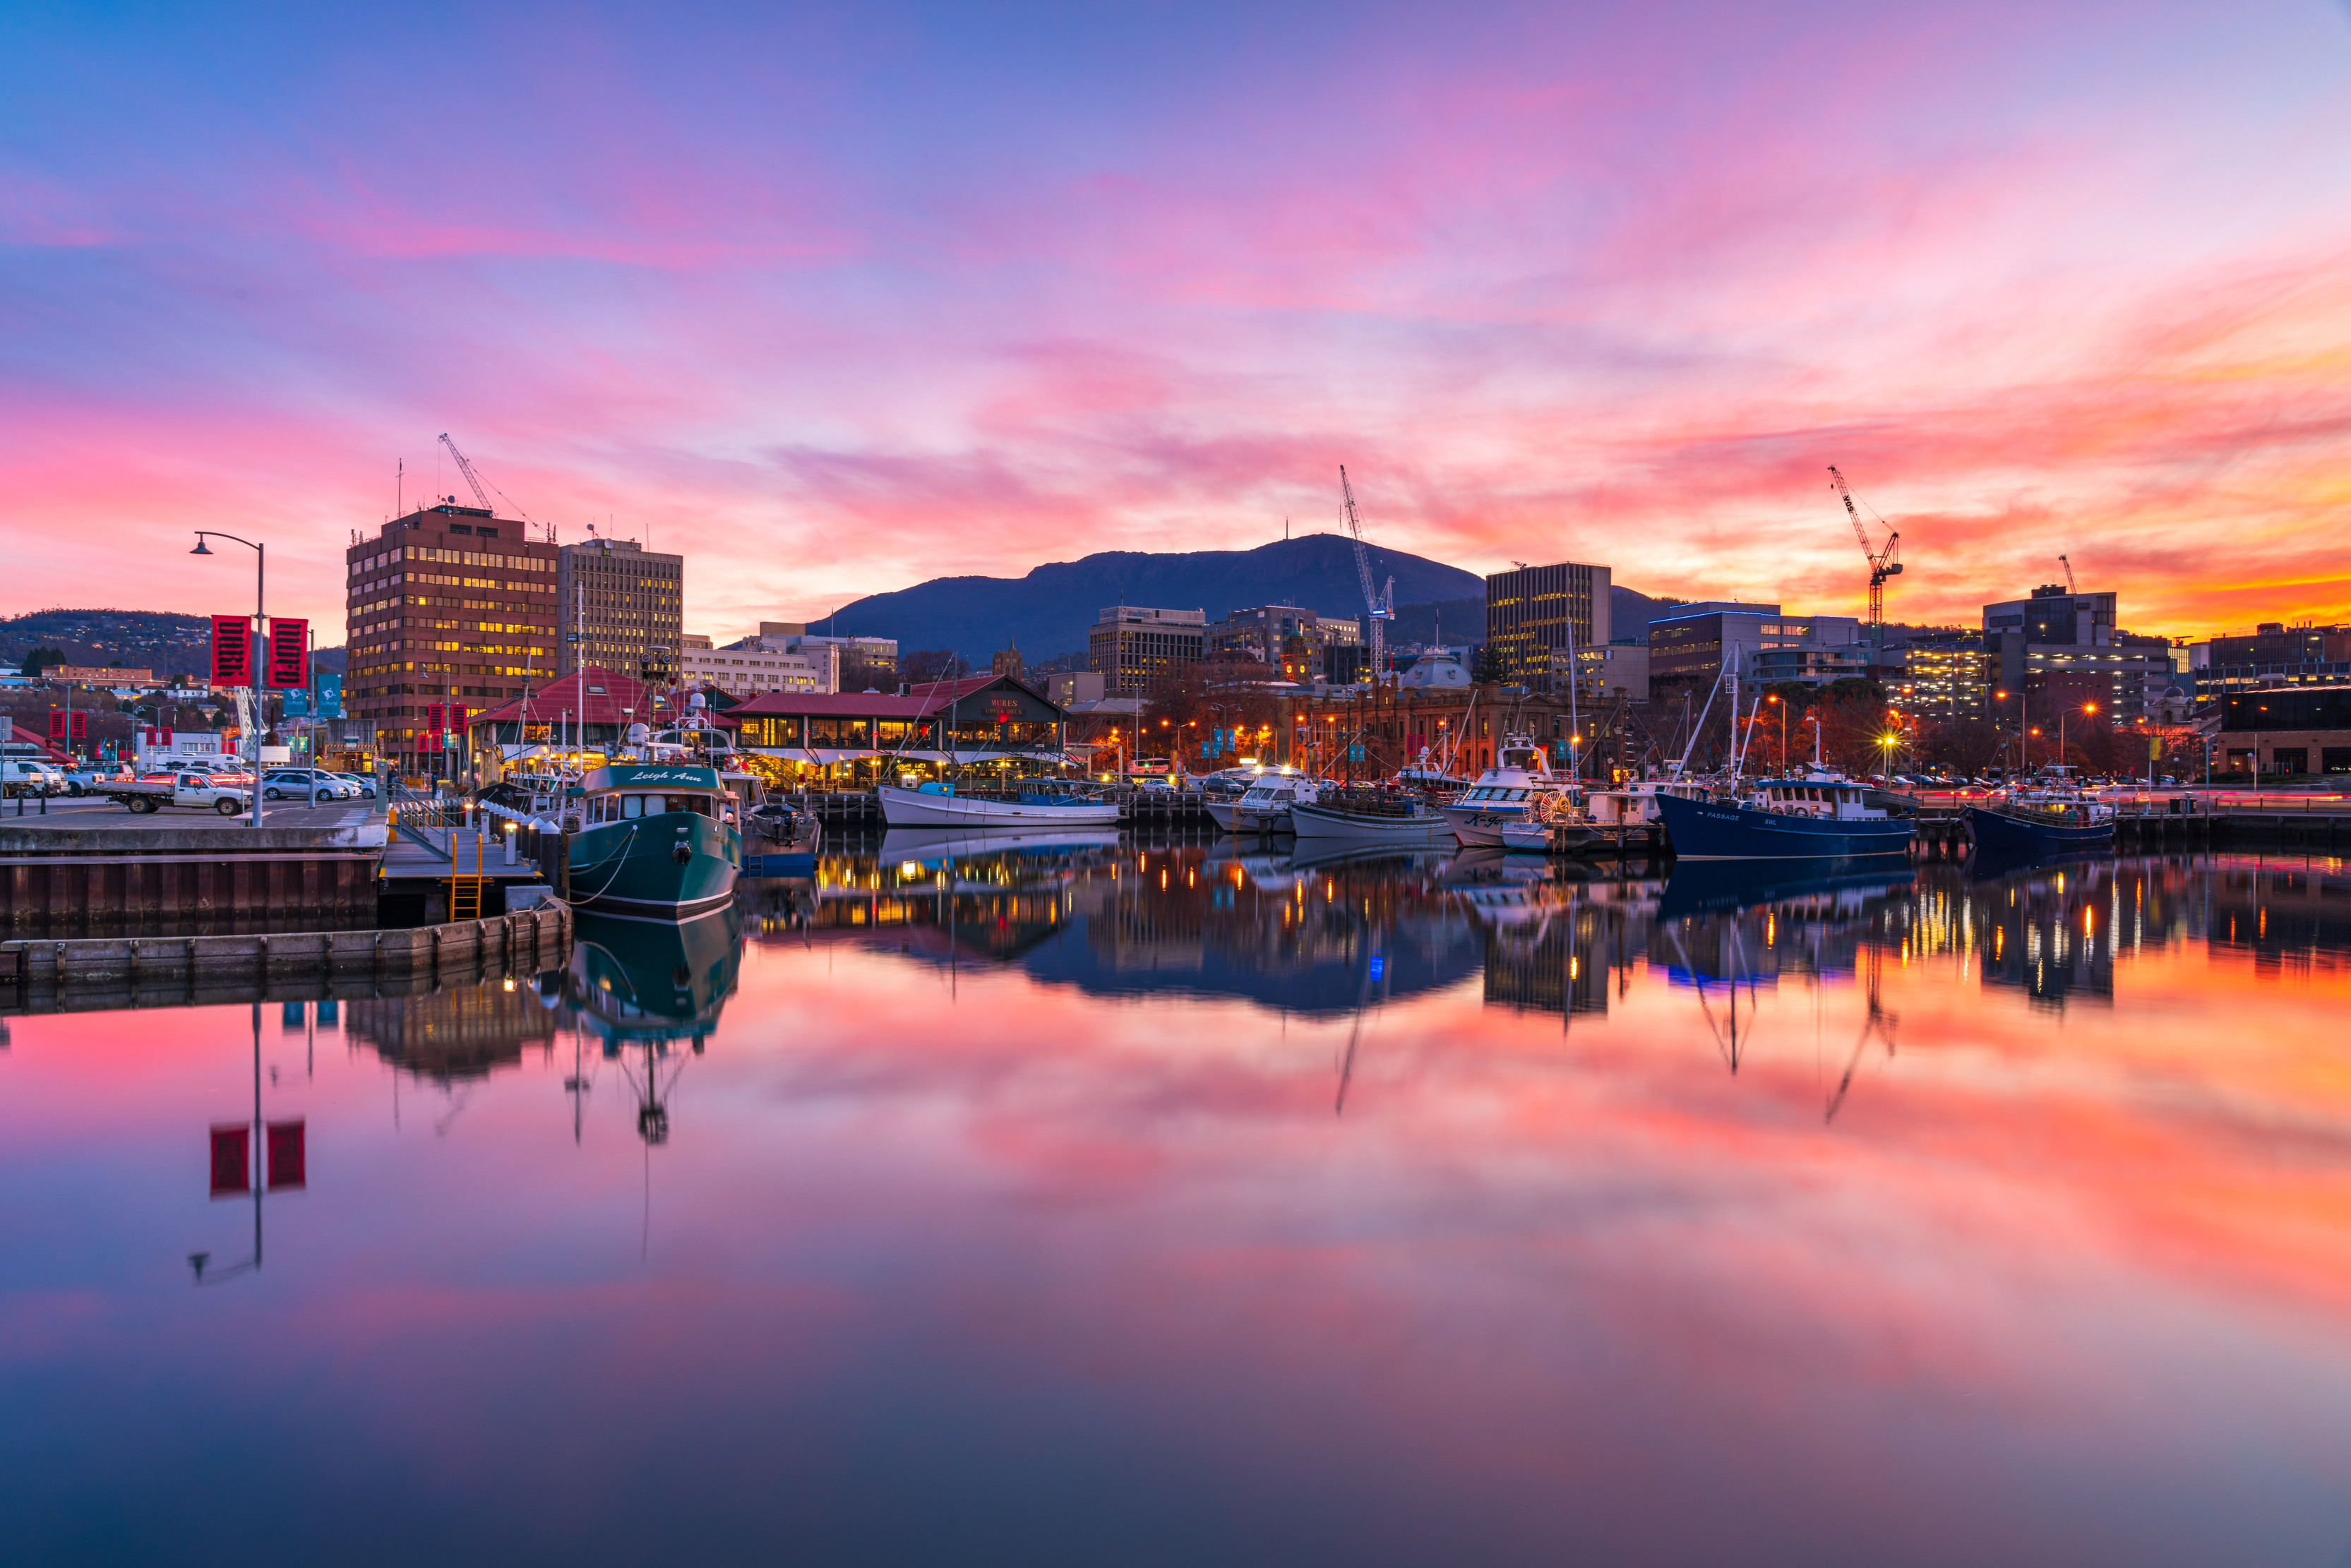 Hobart waterfront at sunset. Hues of pink, purple and orange hitting the skyline and water 